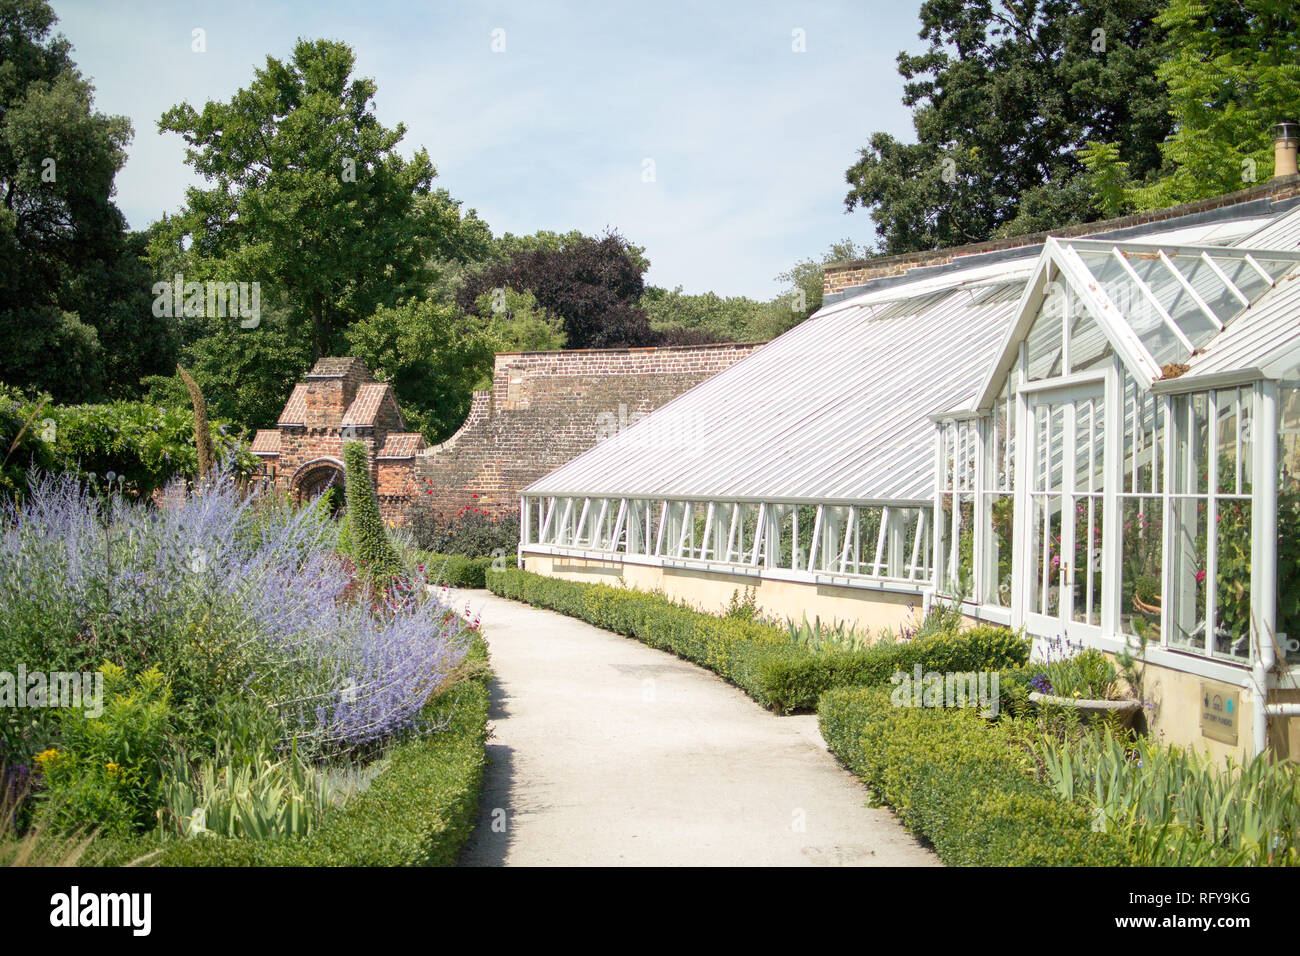 Glasshouse in Tudor Walled Garden at the Bishop's Palace in Fulham, London Stock Photo